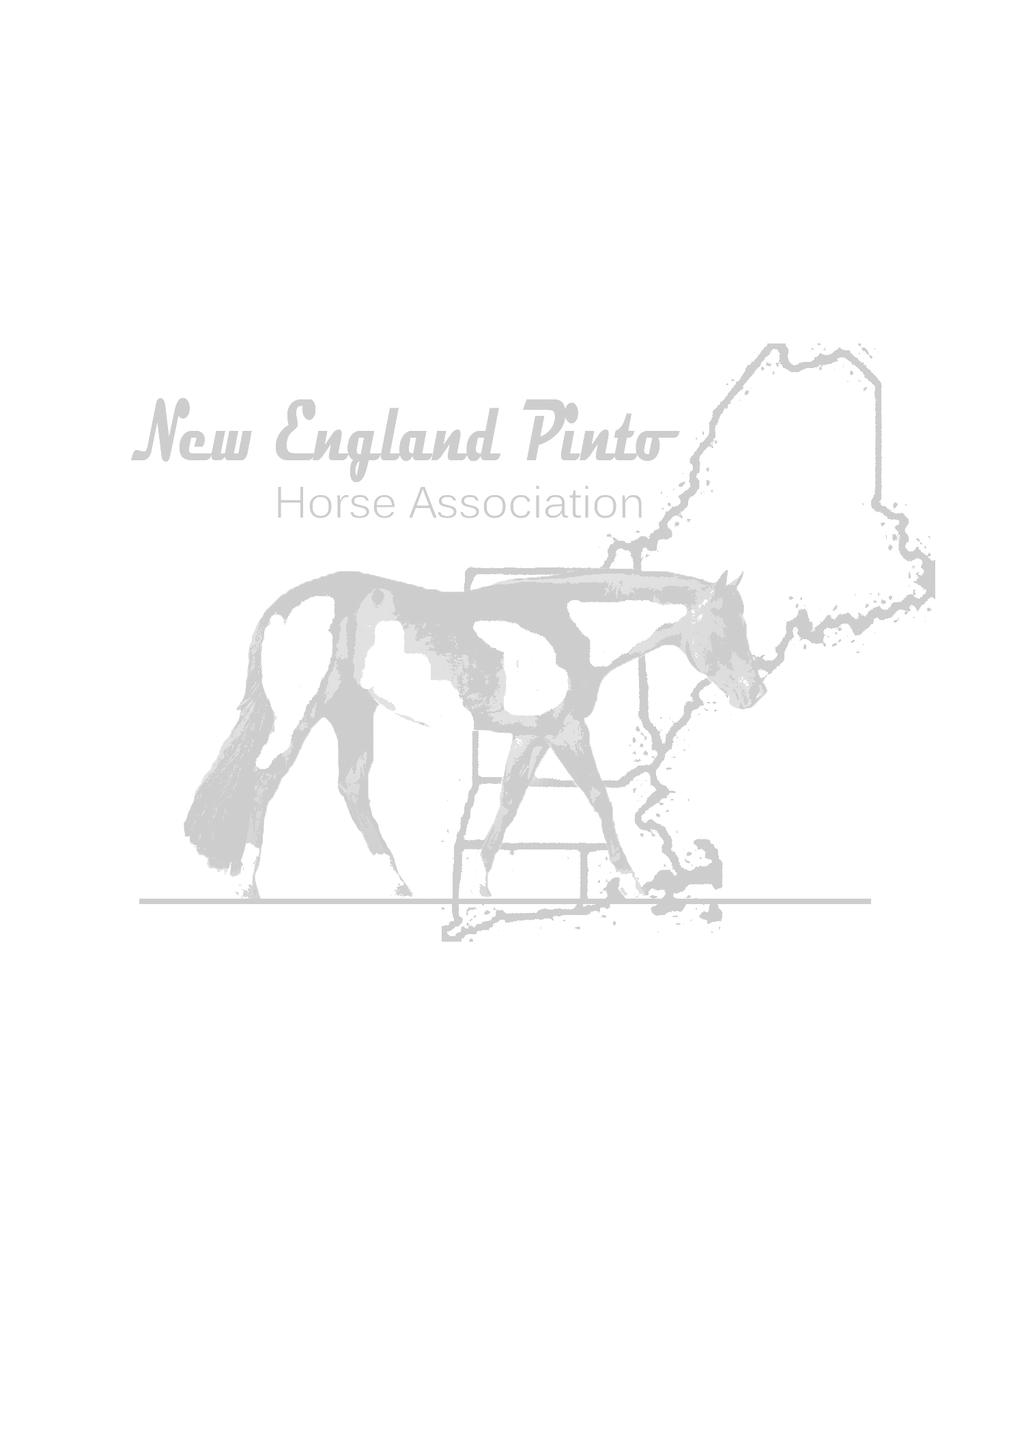 NEW ENGLAND PINTO HORSE ASSOCIATION 5TH ANNUAL BBQ RESERVATION FORM JULY 14, 2018 MENU: CHICKEN, OR Hotdog, OR Cheeseburger, BAKED POTATO, CORN ON THE COB, TOSSED SALAD, DINNER ROLL, LEMONADE DRINK